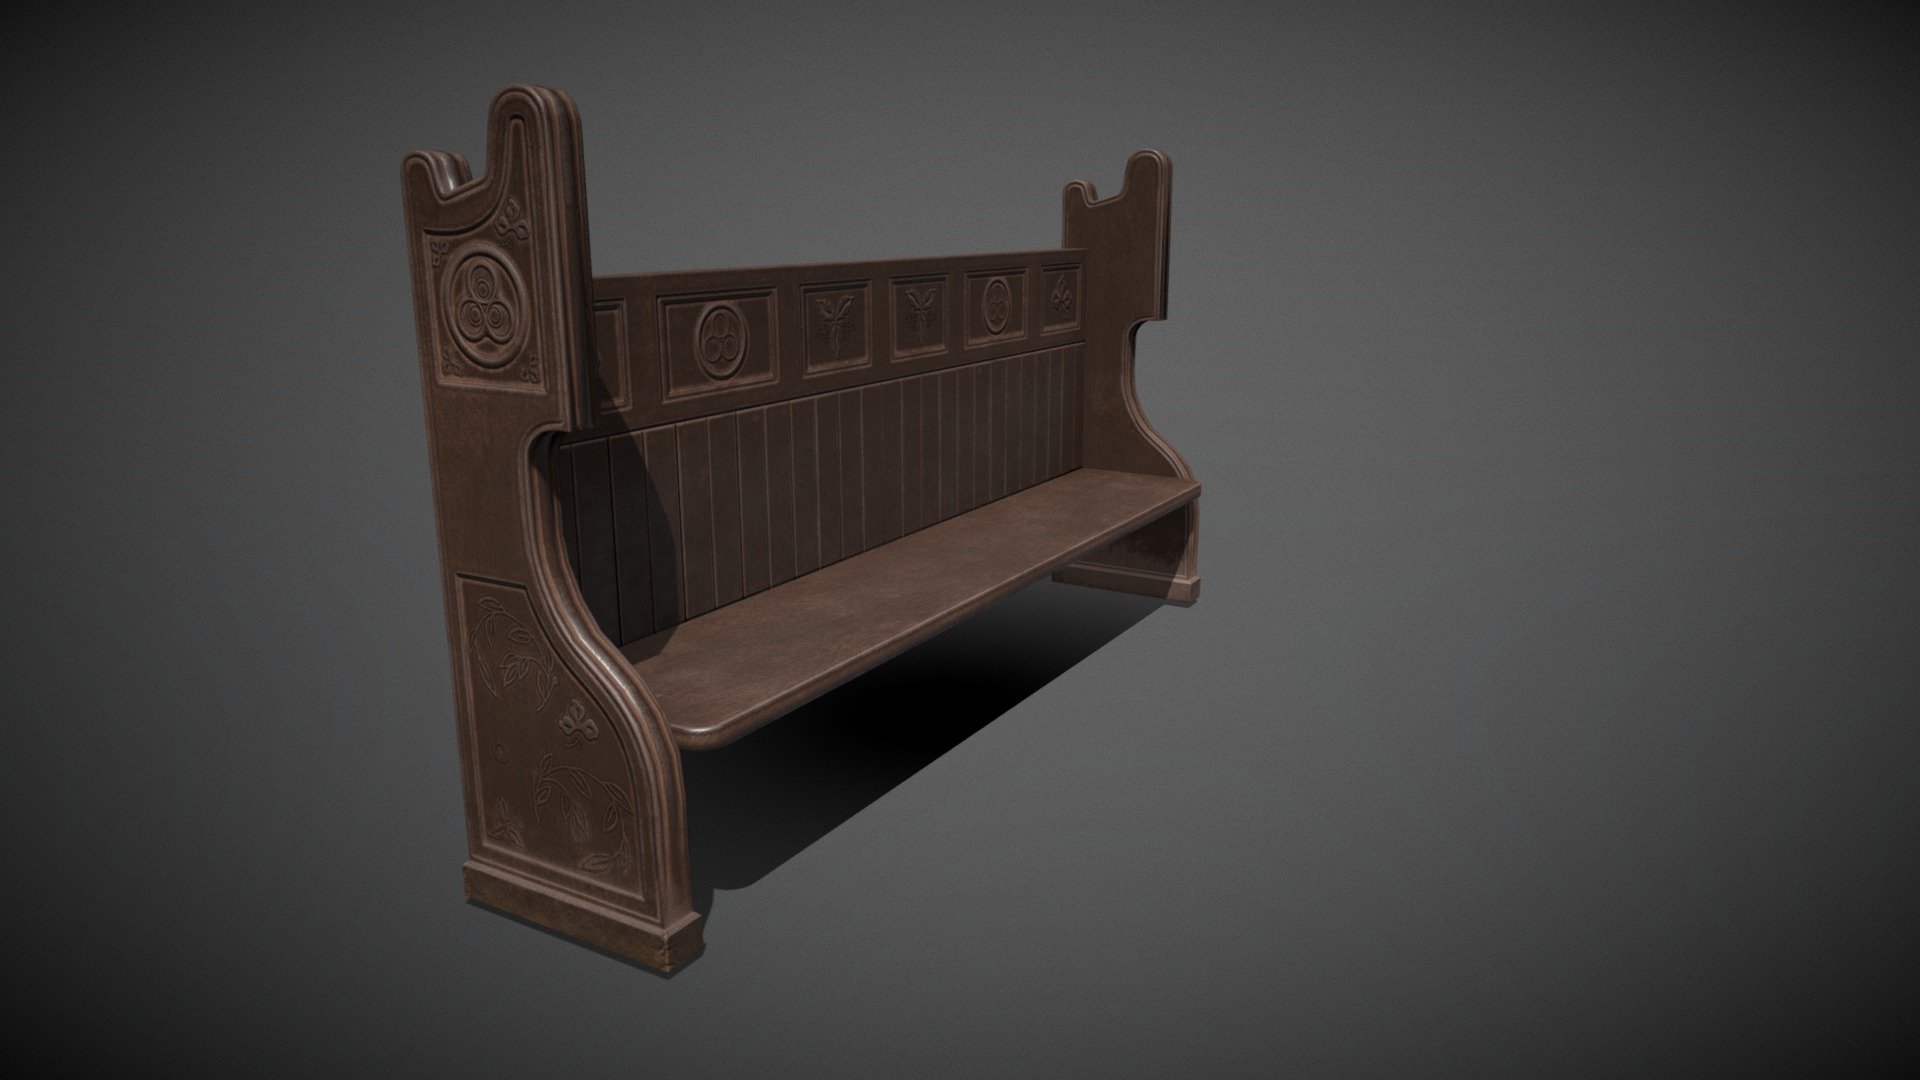 Church bench made while learning 3d model